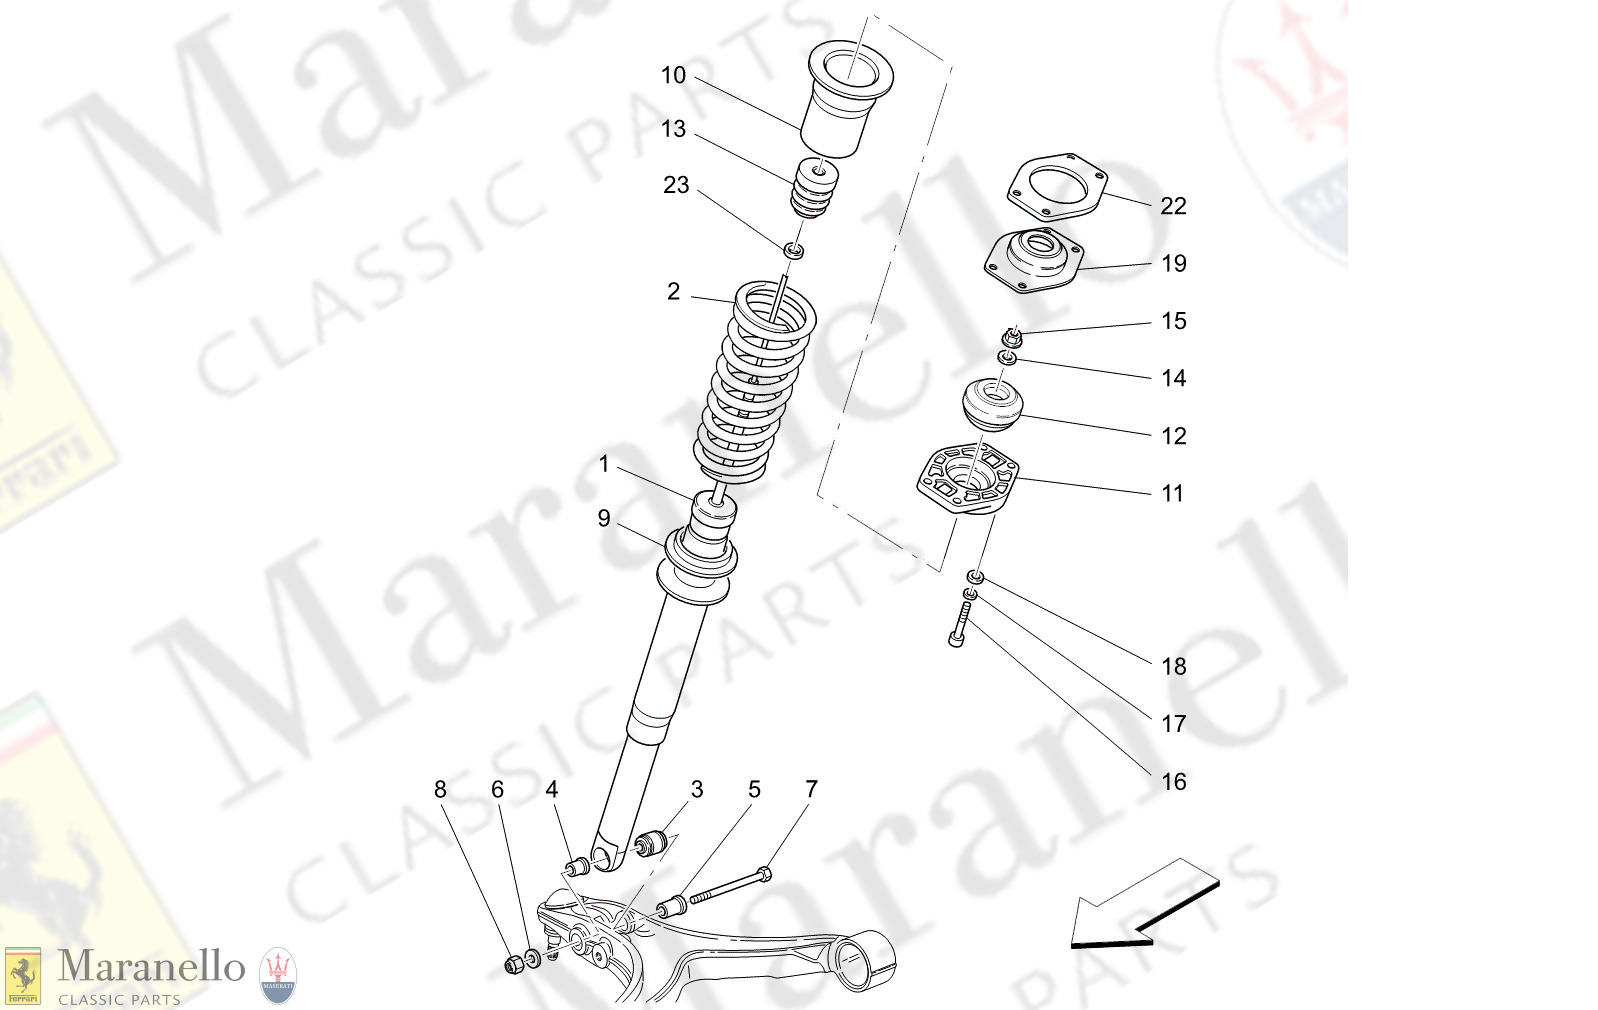 06.11 - 16 - 0611 - 16 Front Shock Absorber Devices